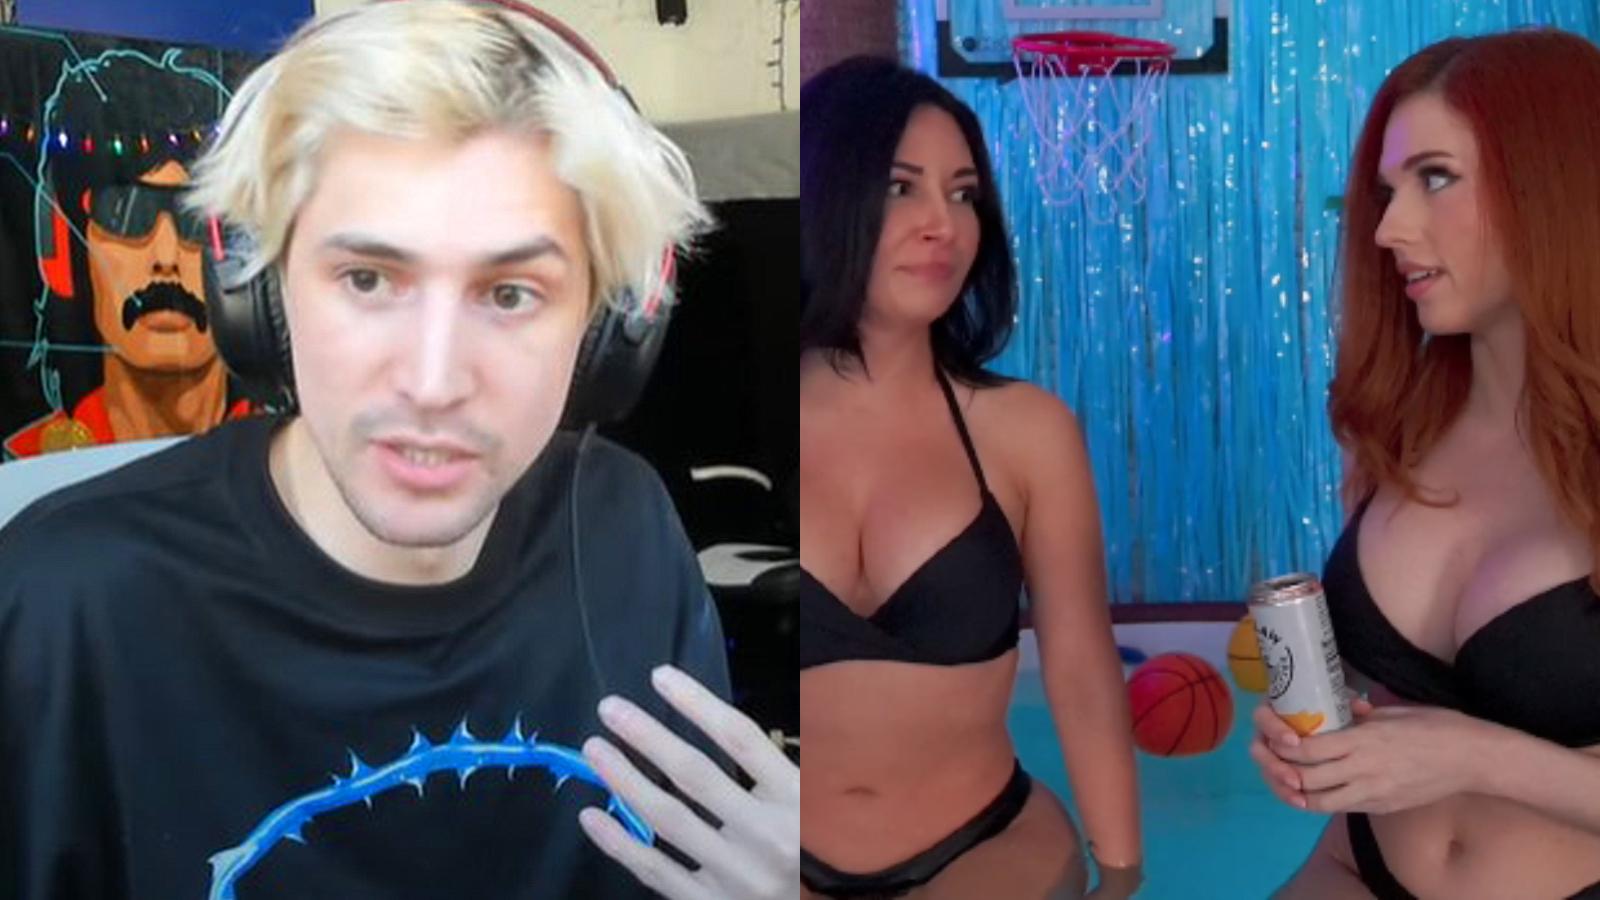 xqc in onlyfans video with alinity and amouranth